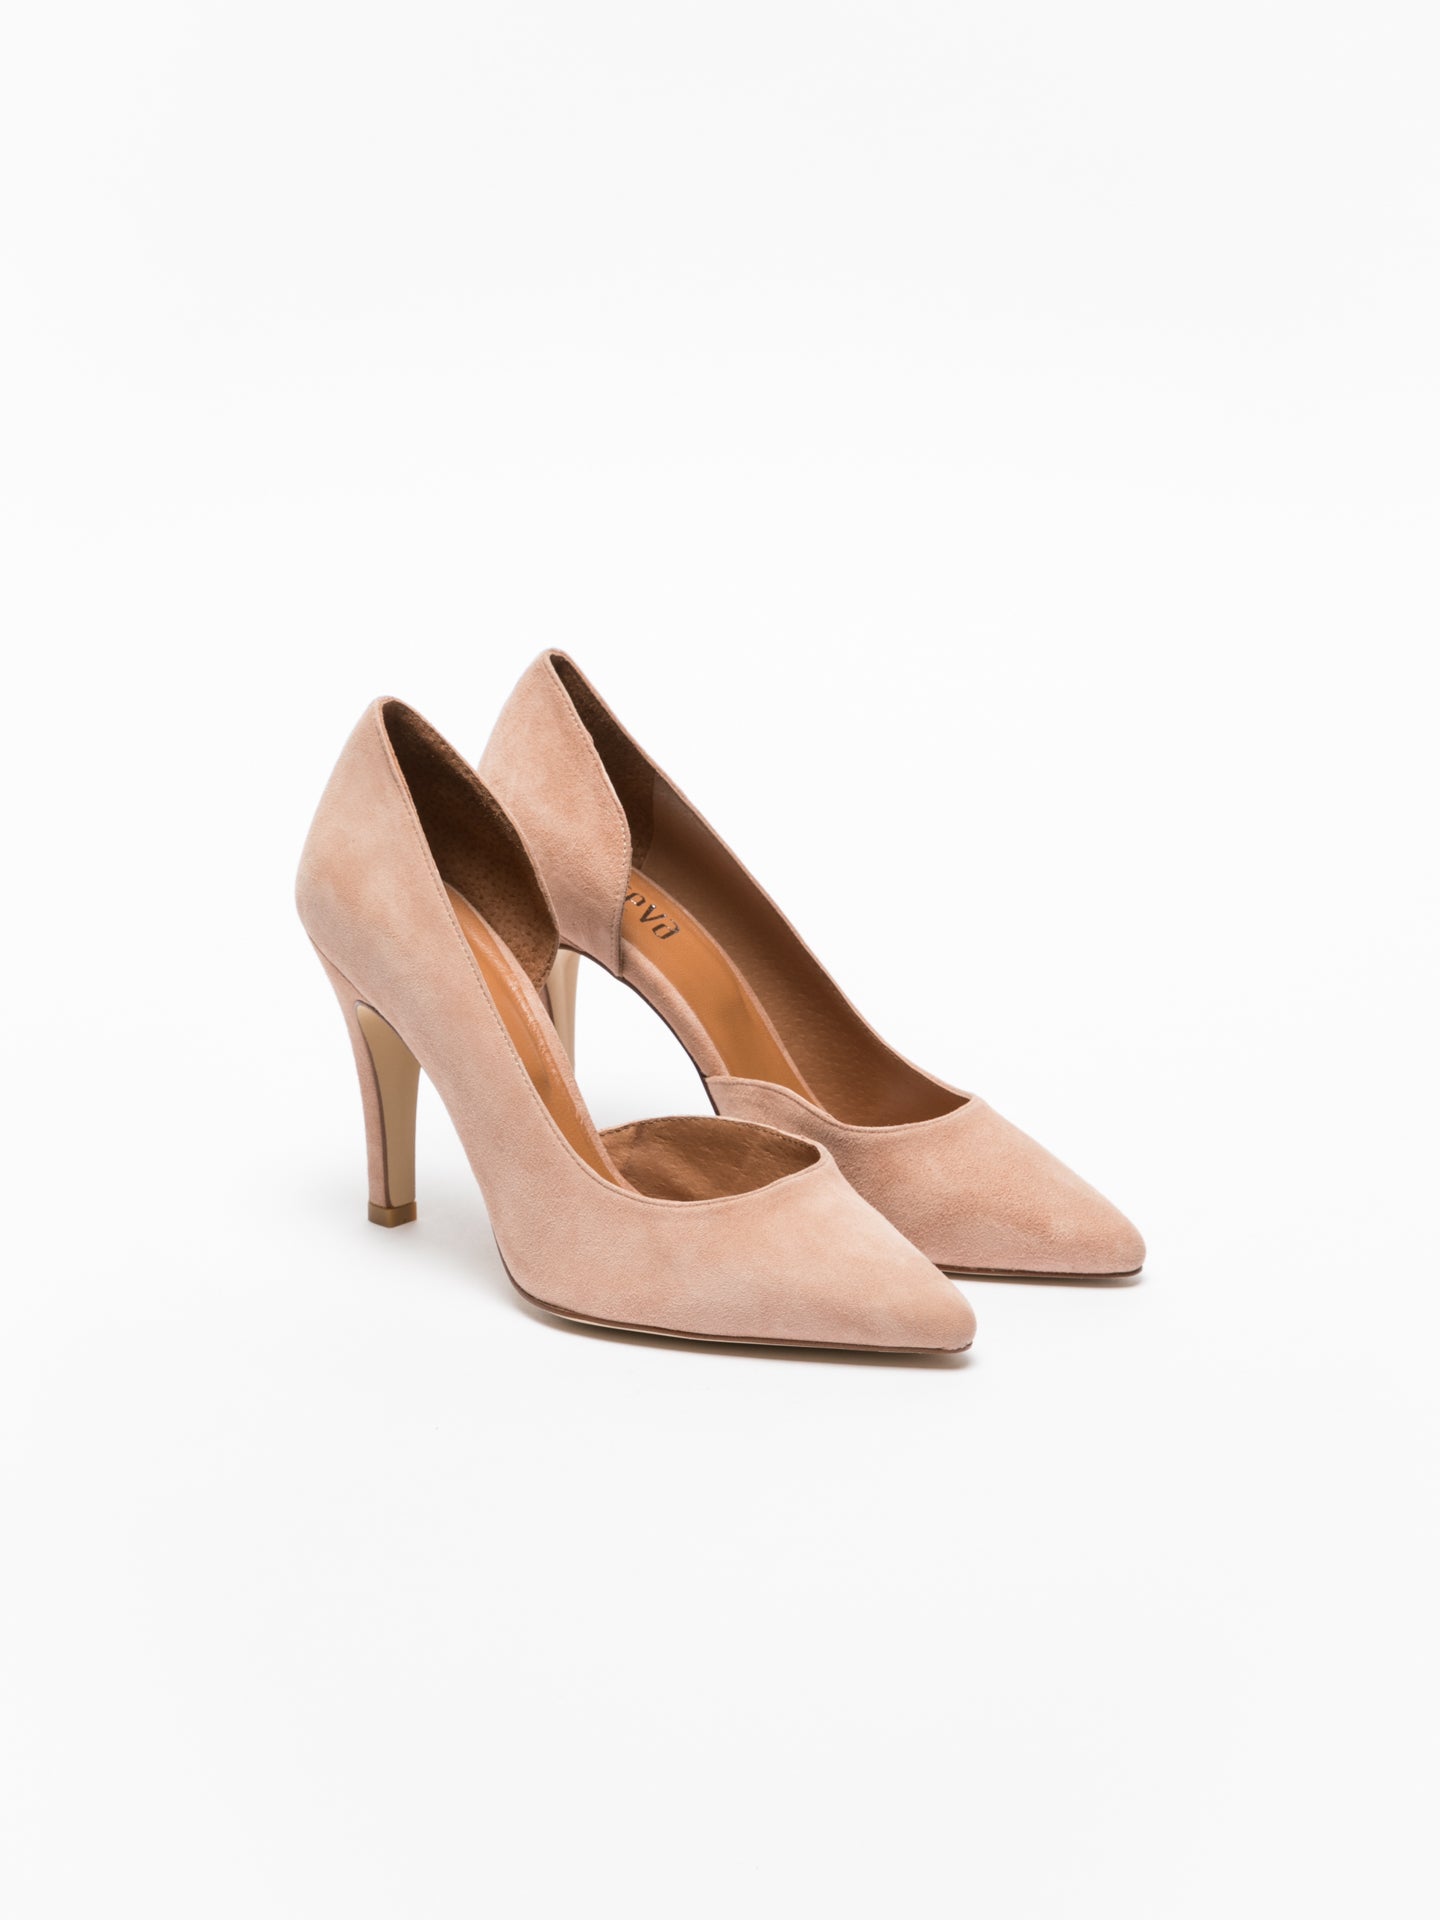 Foreva Pink Classic Pumps Shoes